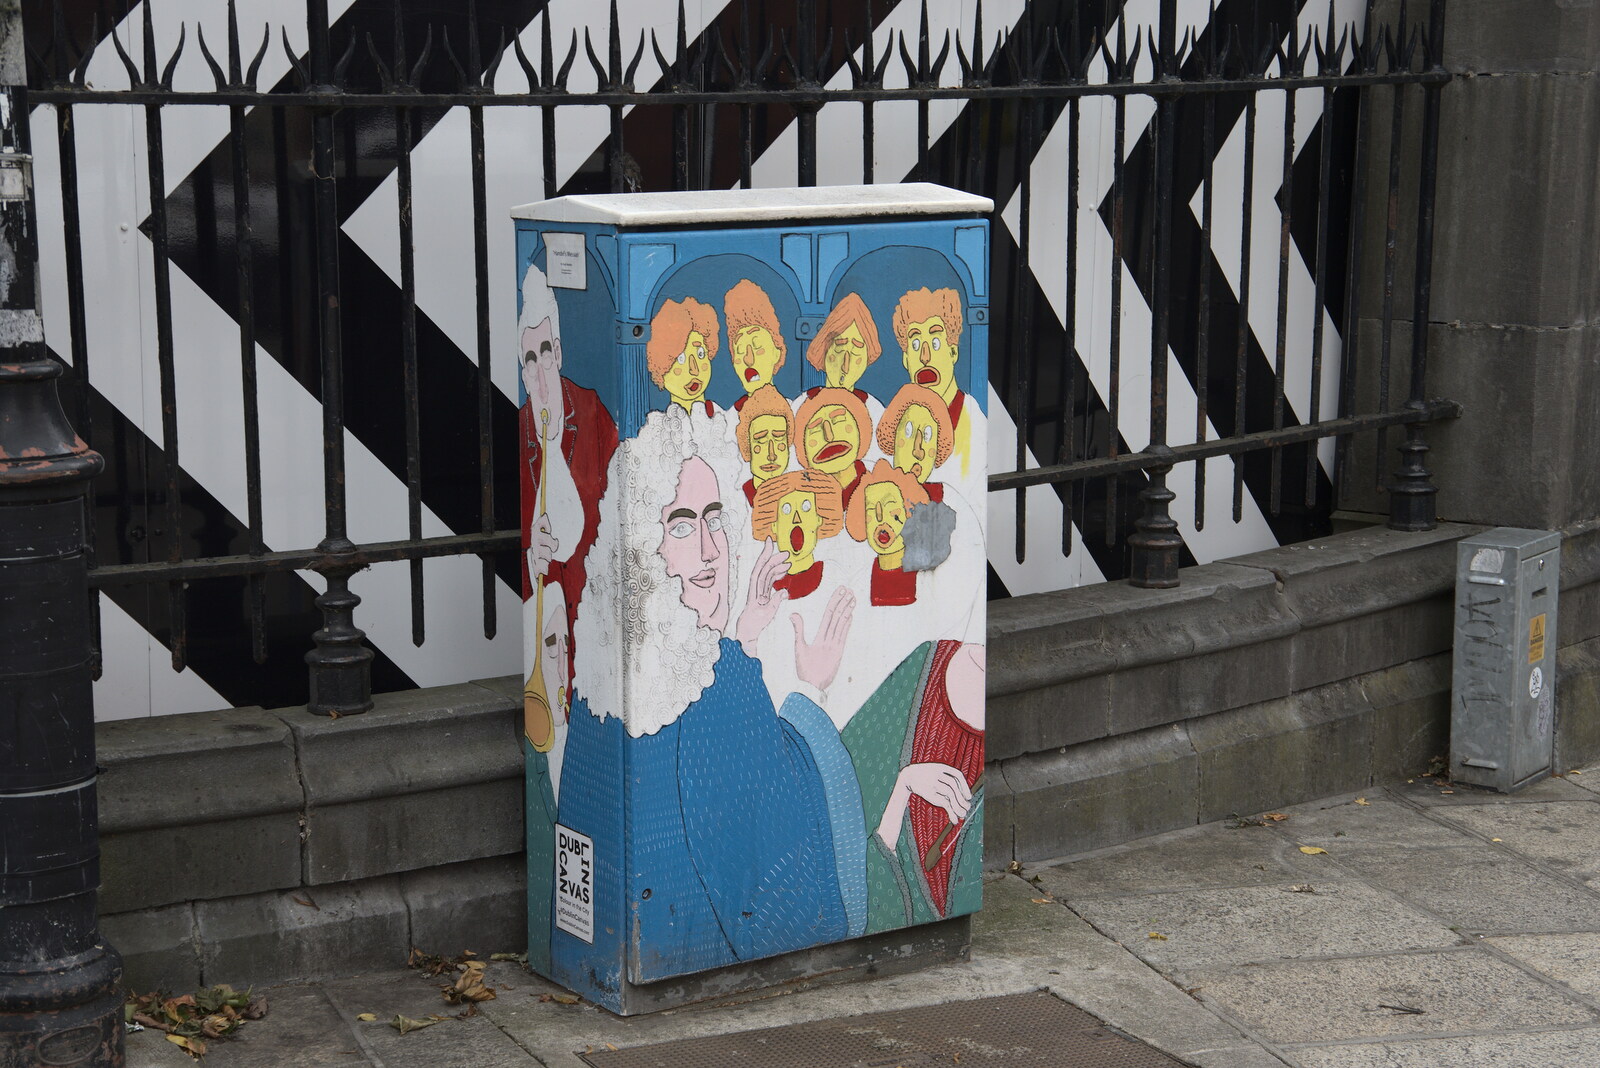 A painted choir on a traffic light control box from A Trip to Noddy's, and Dublin City Centre, Wicklow and Dublin, Ireland - 16th August 2021